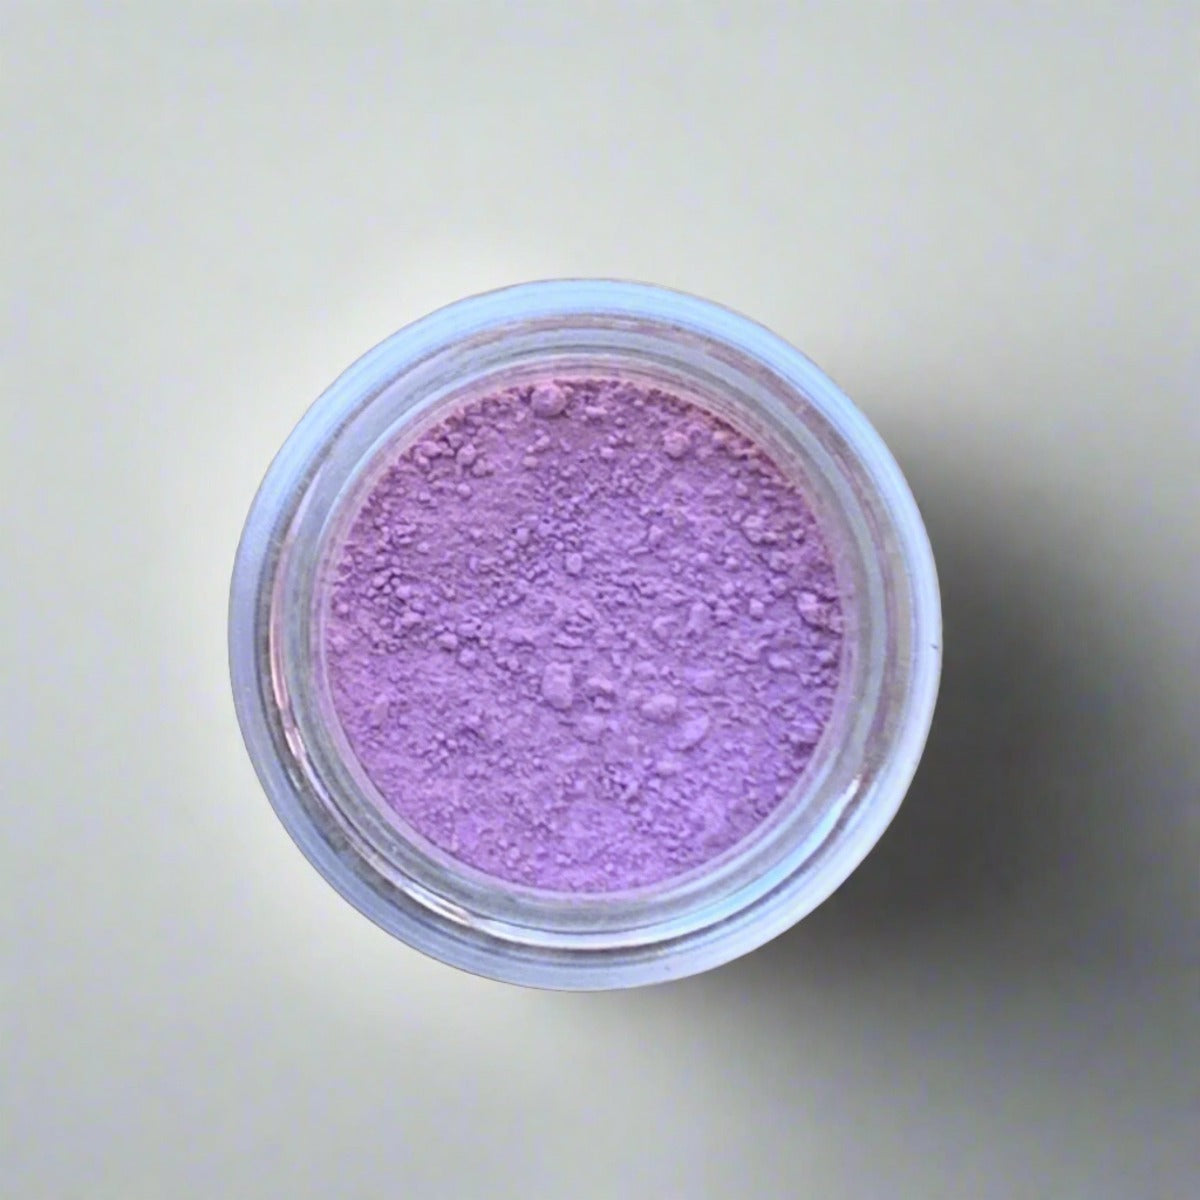 Cosmetic jar of soft pink eyeshadow loose powder, displaying its color and texture